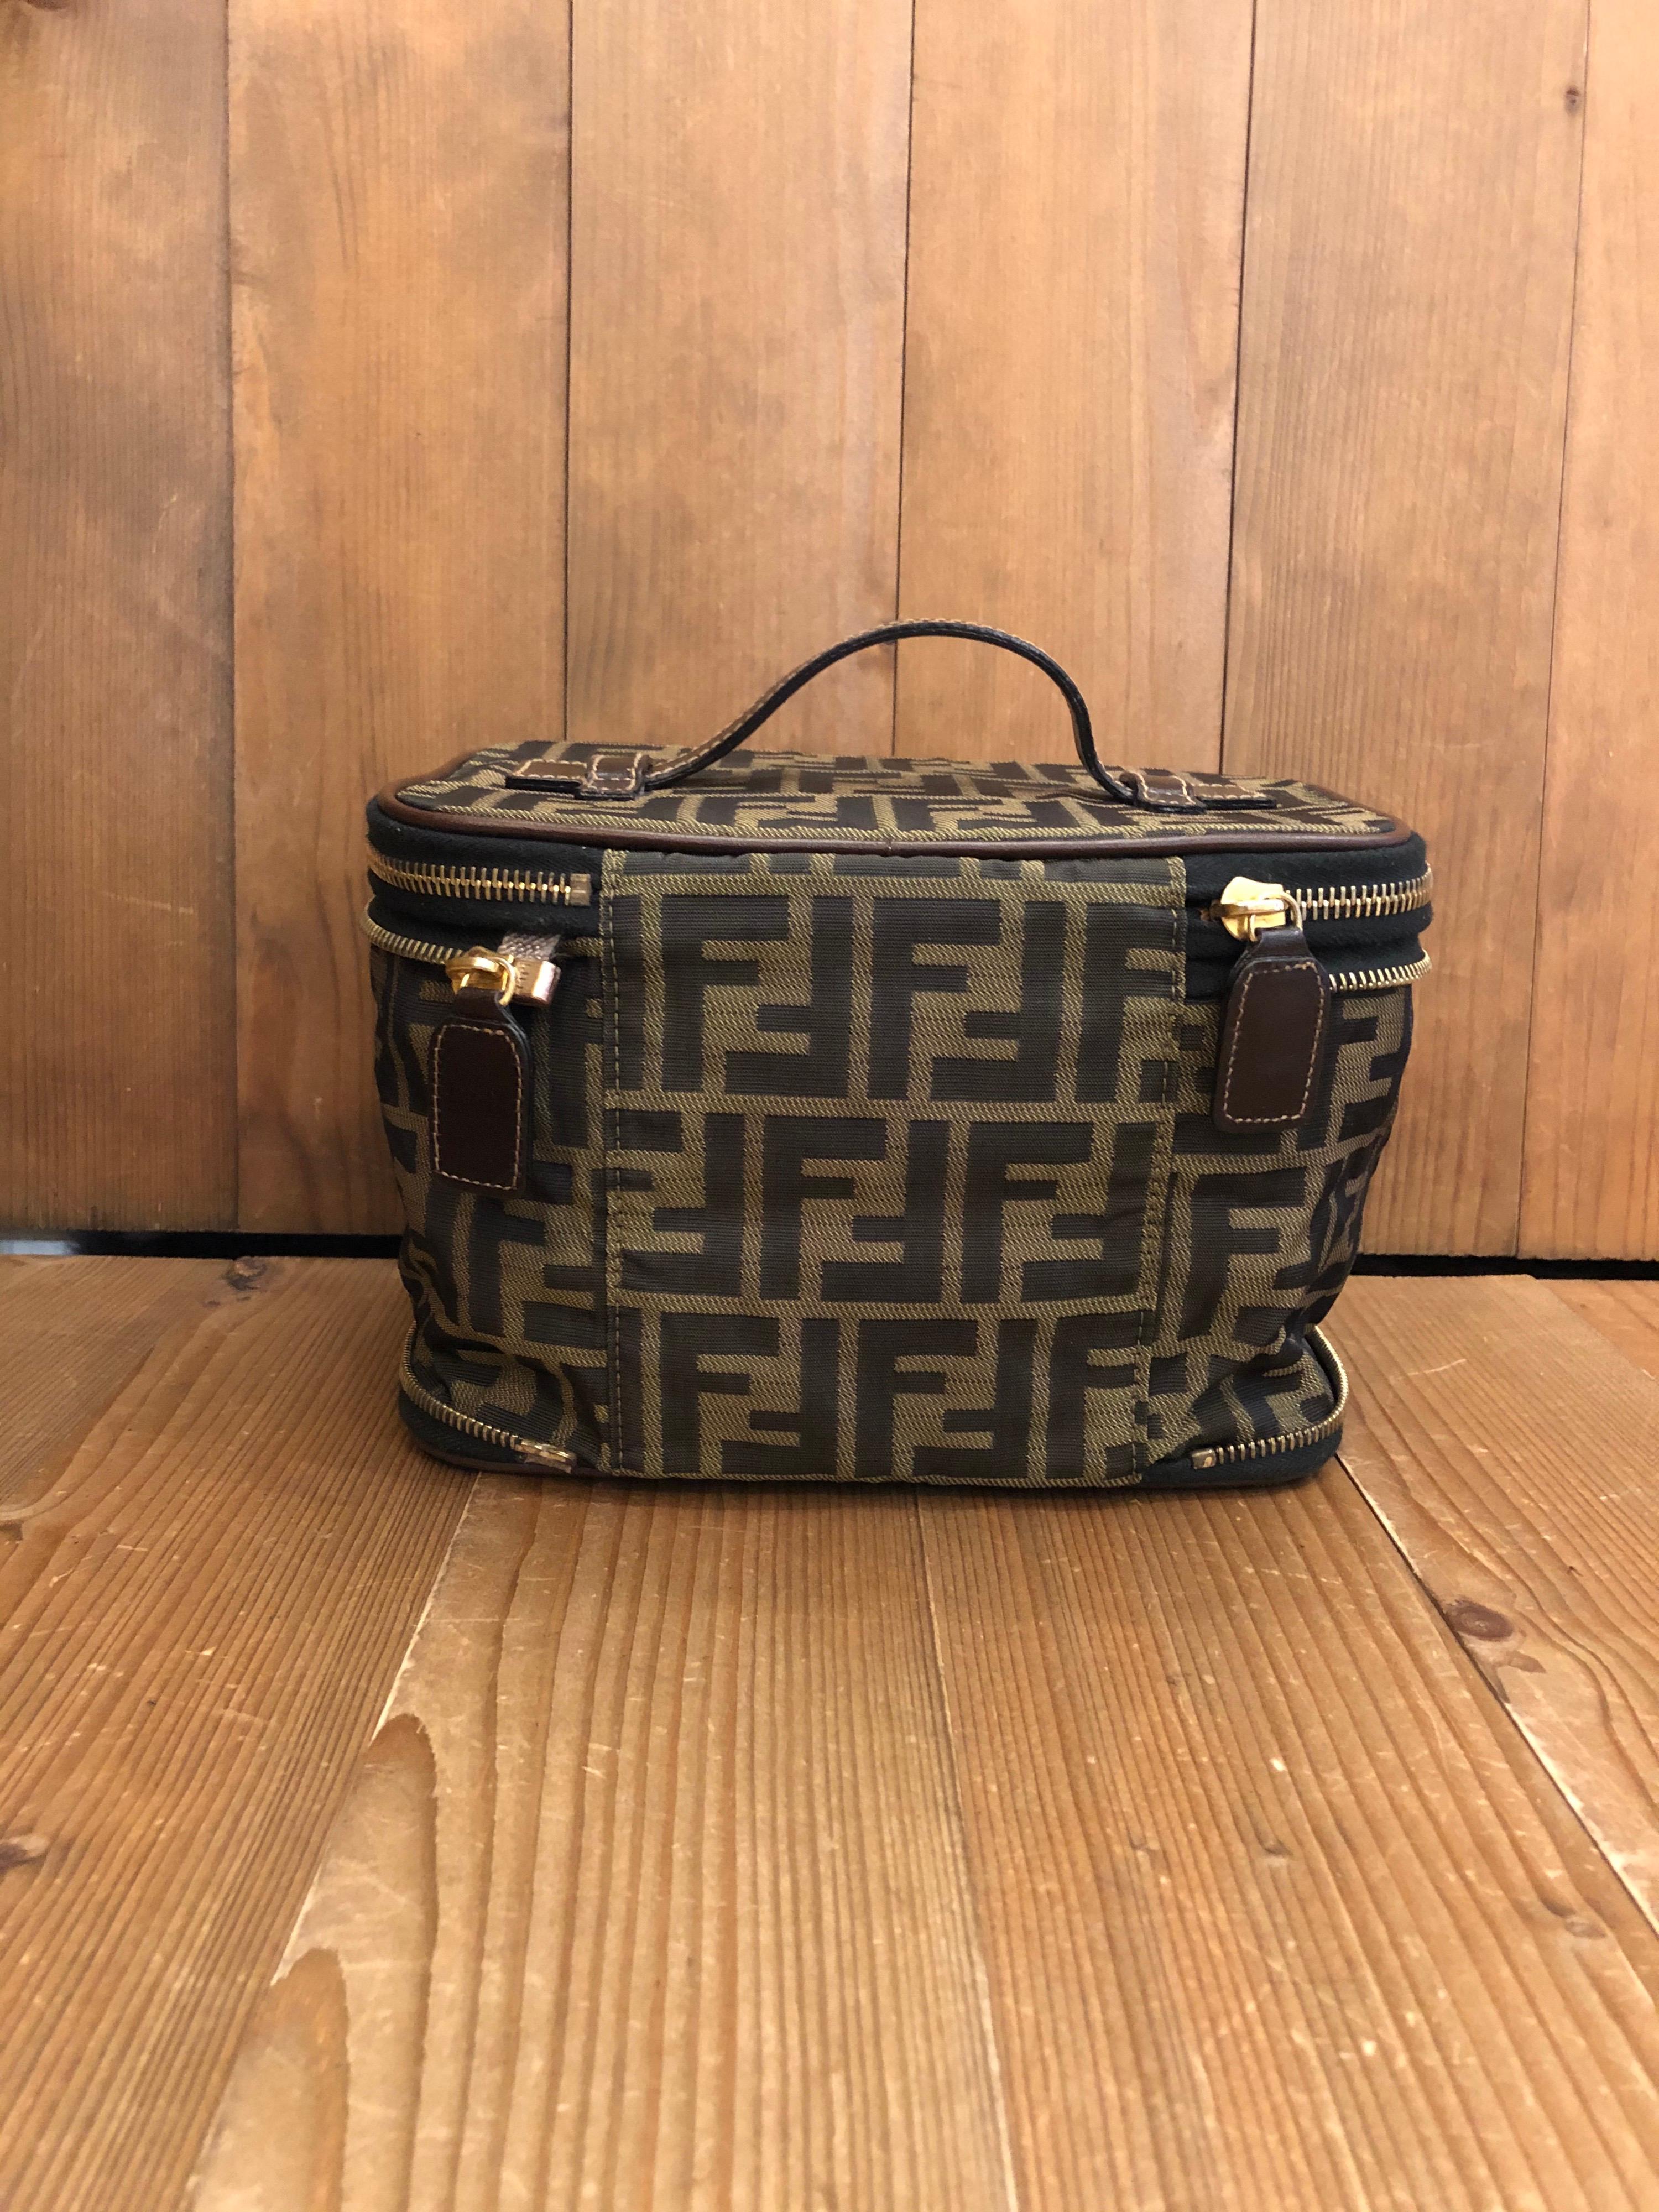 FENDI Brown Zucca Jacquard Foldable Cosmetic Vanity Pouch Handbag. Made in Italy. Measures  8.25 x 5.5 x 6 inches 
Material: Jacquard/Leather

Condition:
Outside: Minor signs of wear on jacquard and leather trimmings.
Inside: Clean with minor signs